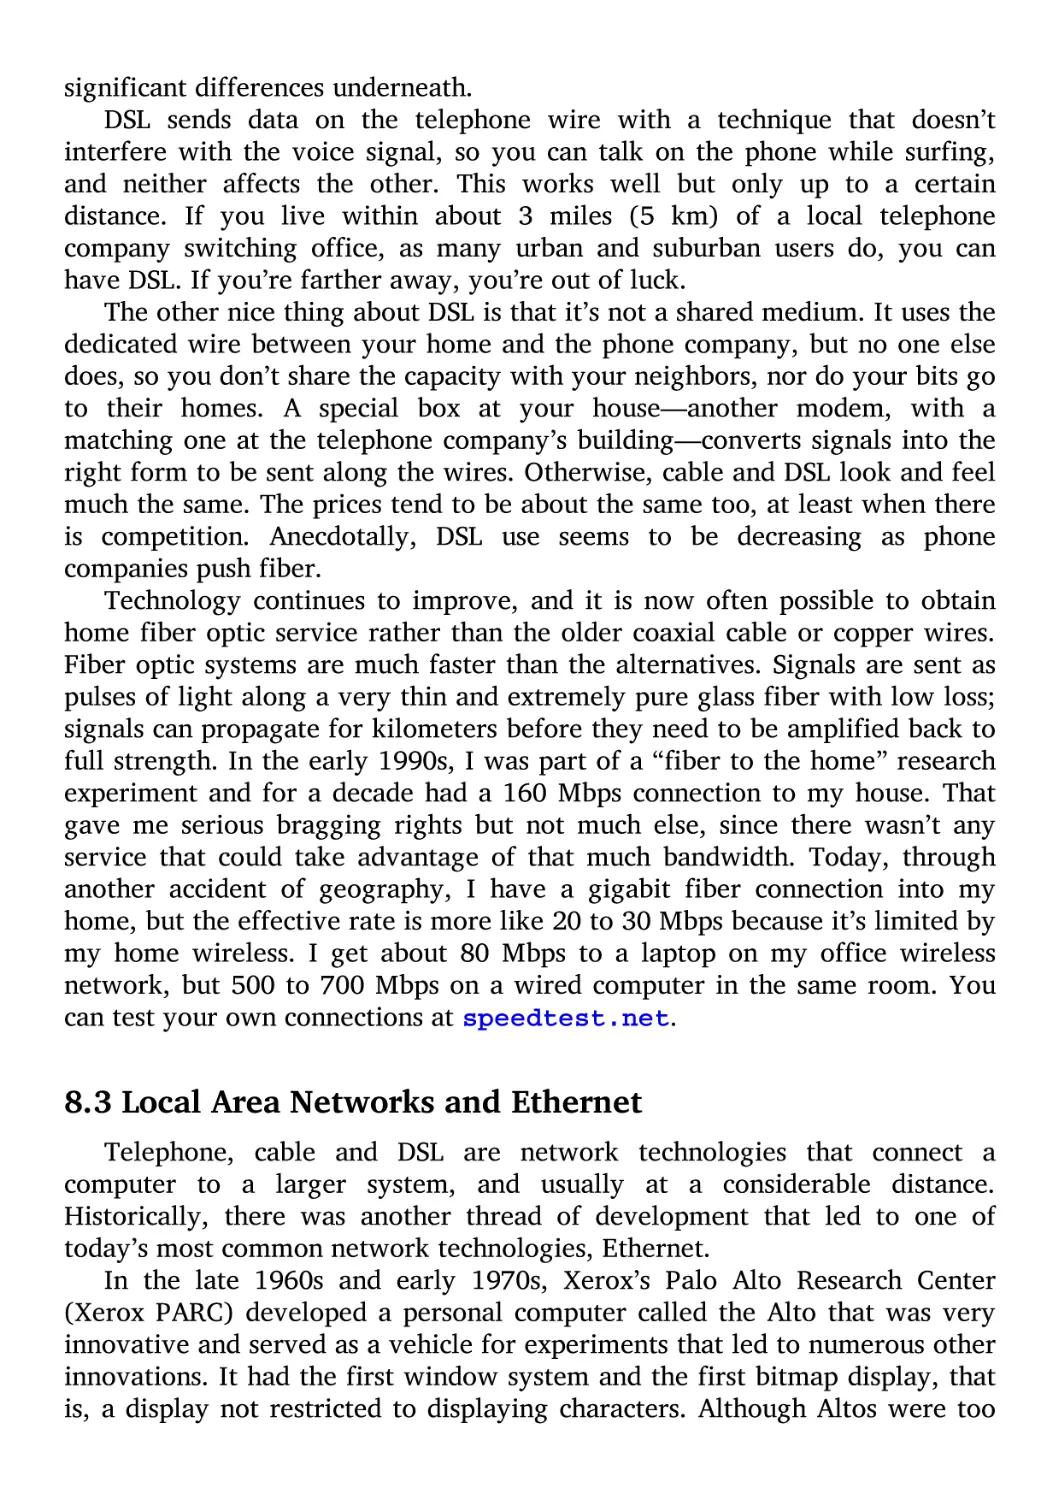 8.3 Local Area Networks and Ethernet